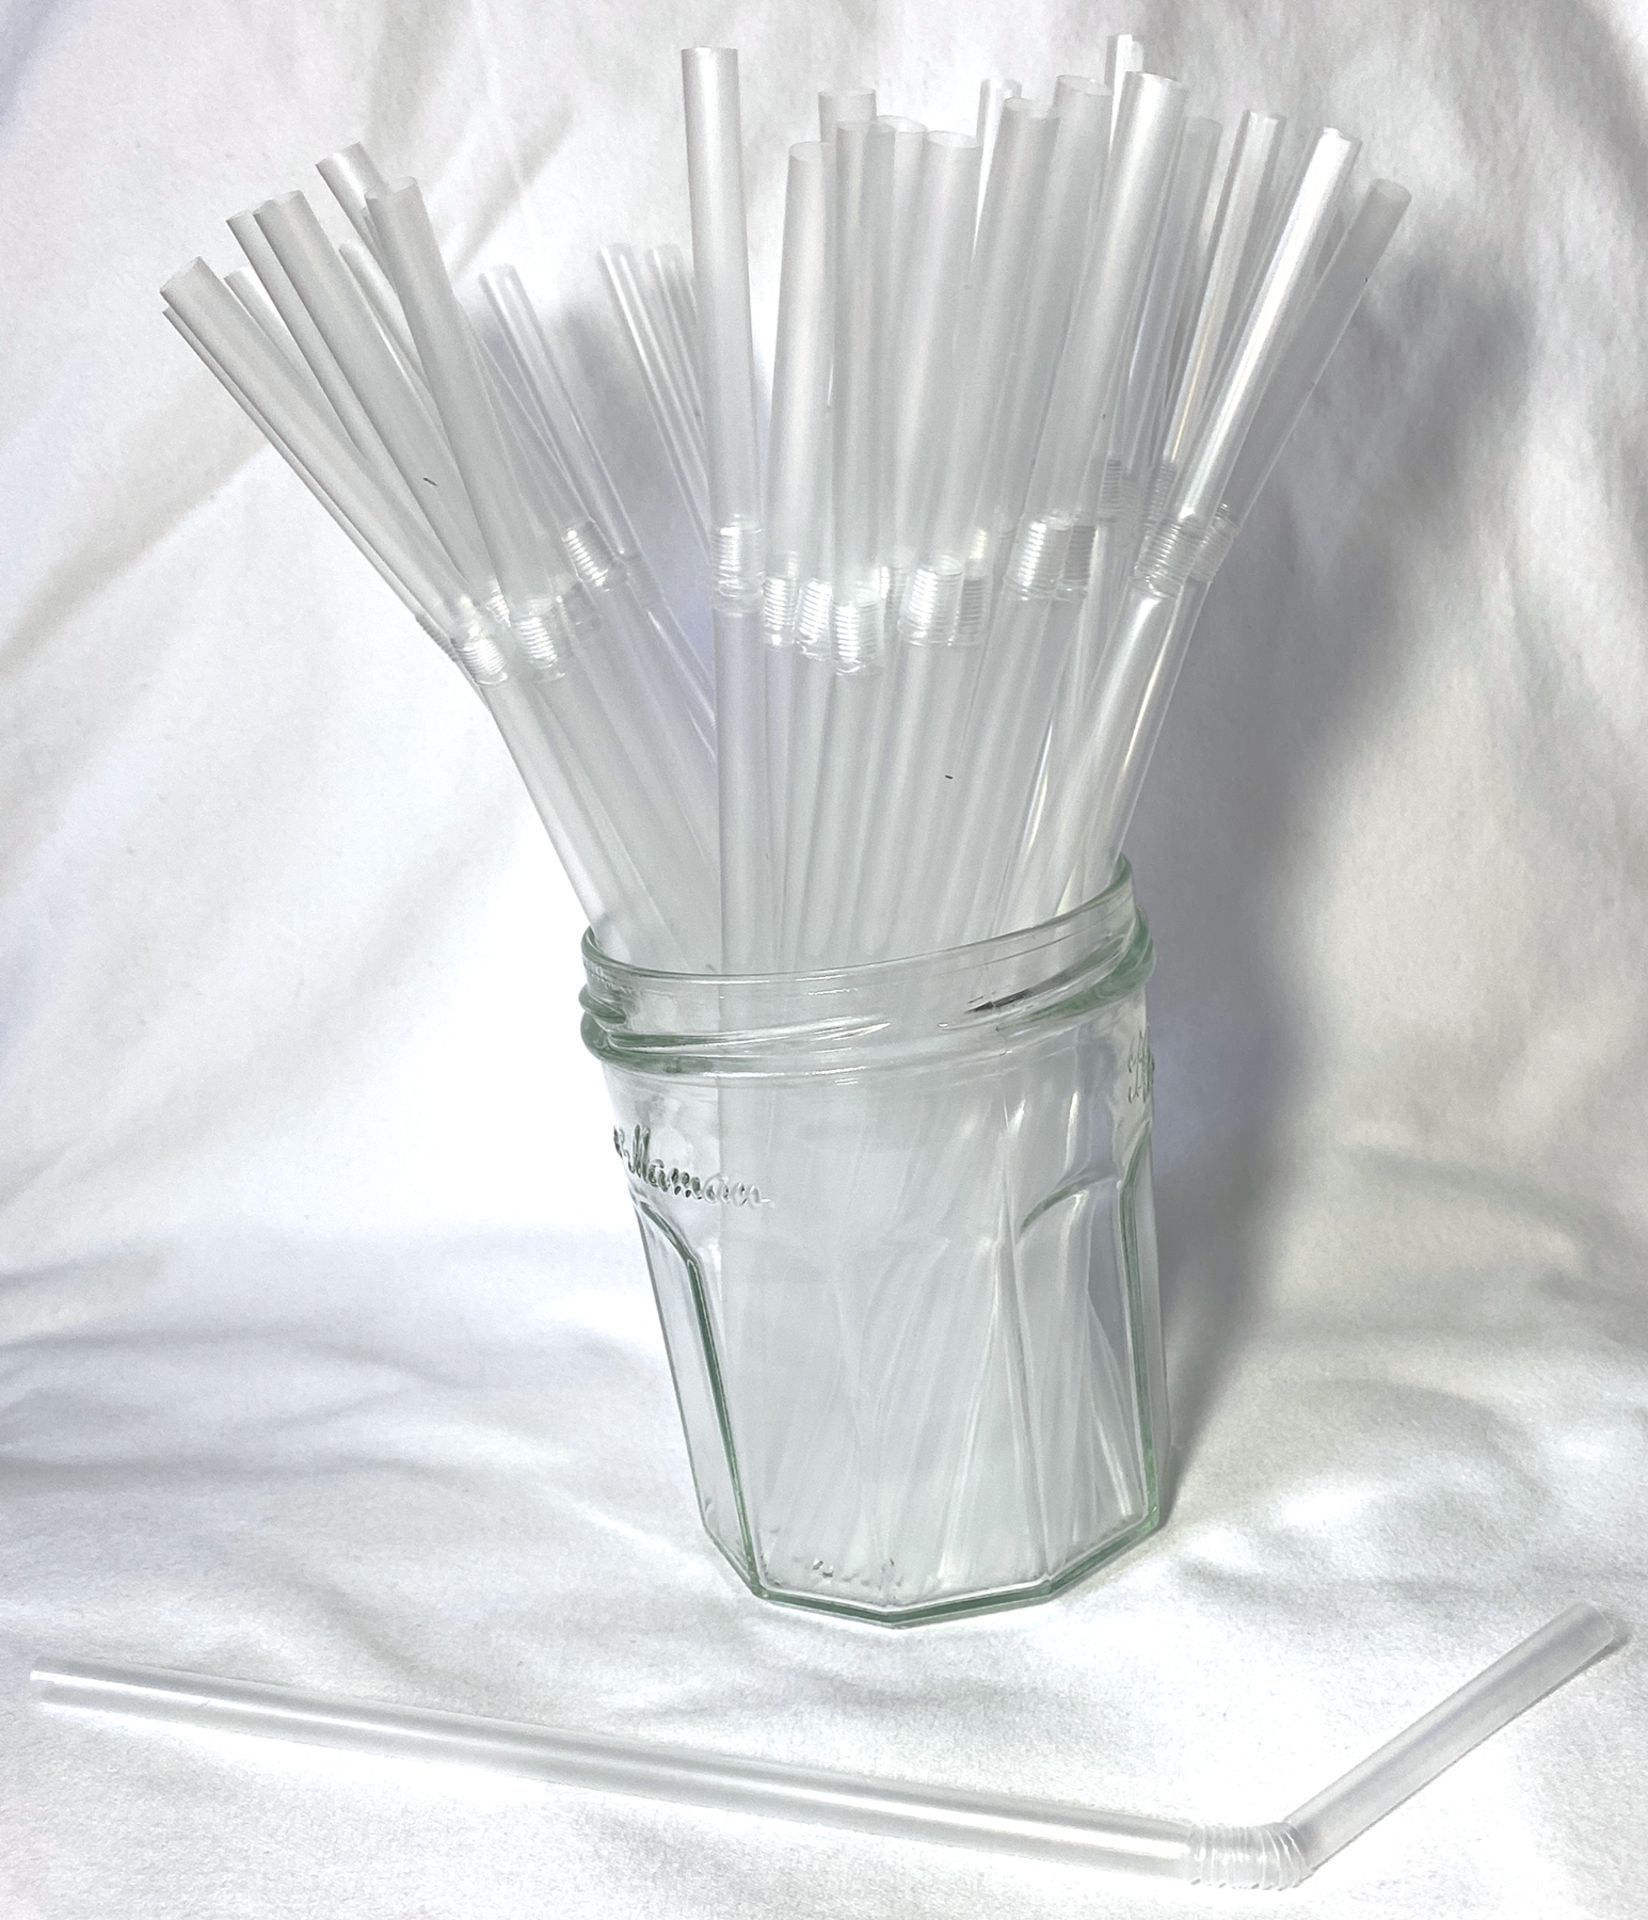 2 x Boxes of Clear Flexi Straws by 888 Gastro Disposables | DSP32 - Image 2 of 3